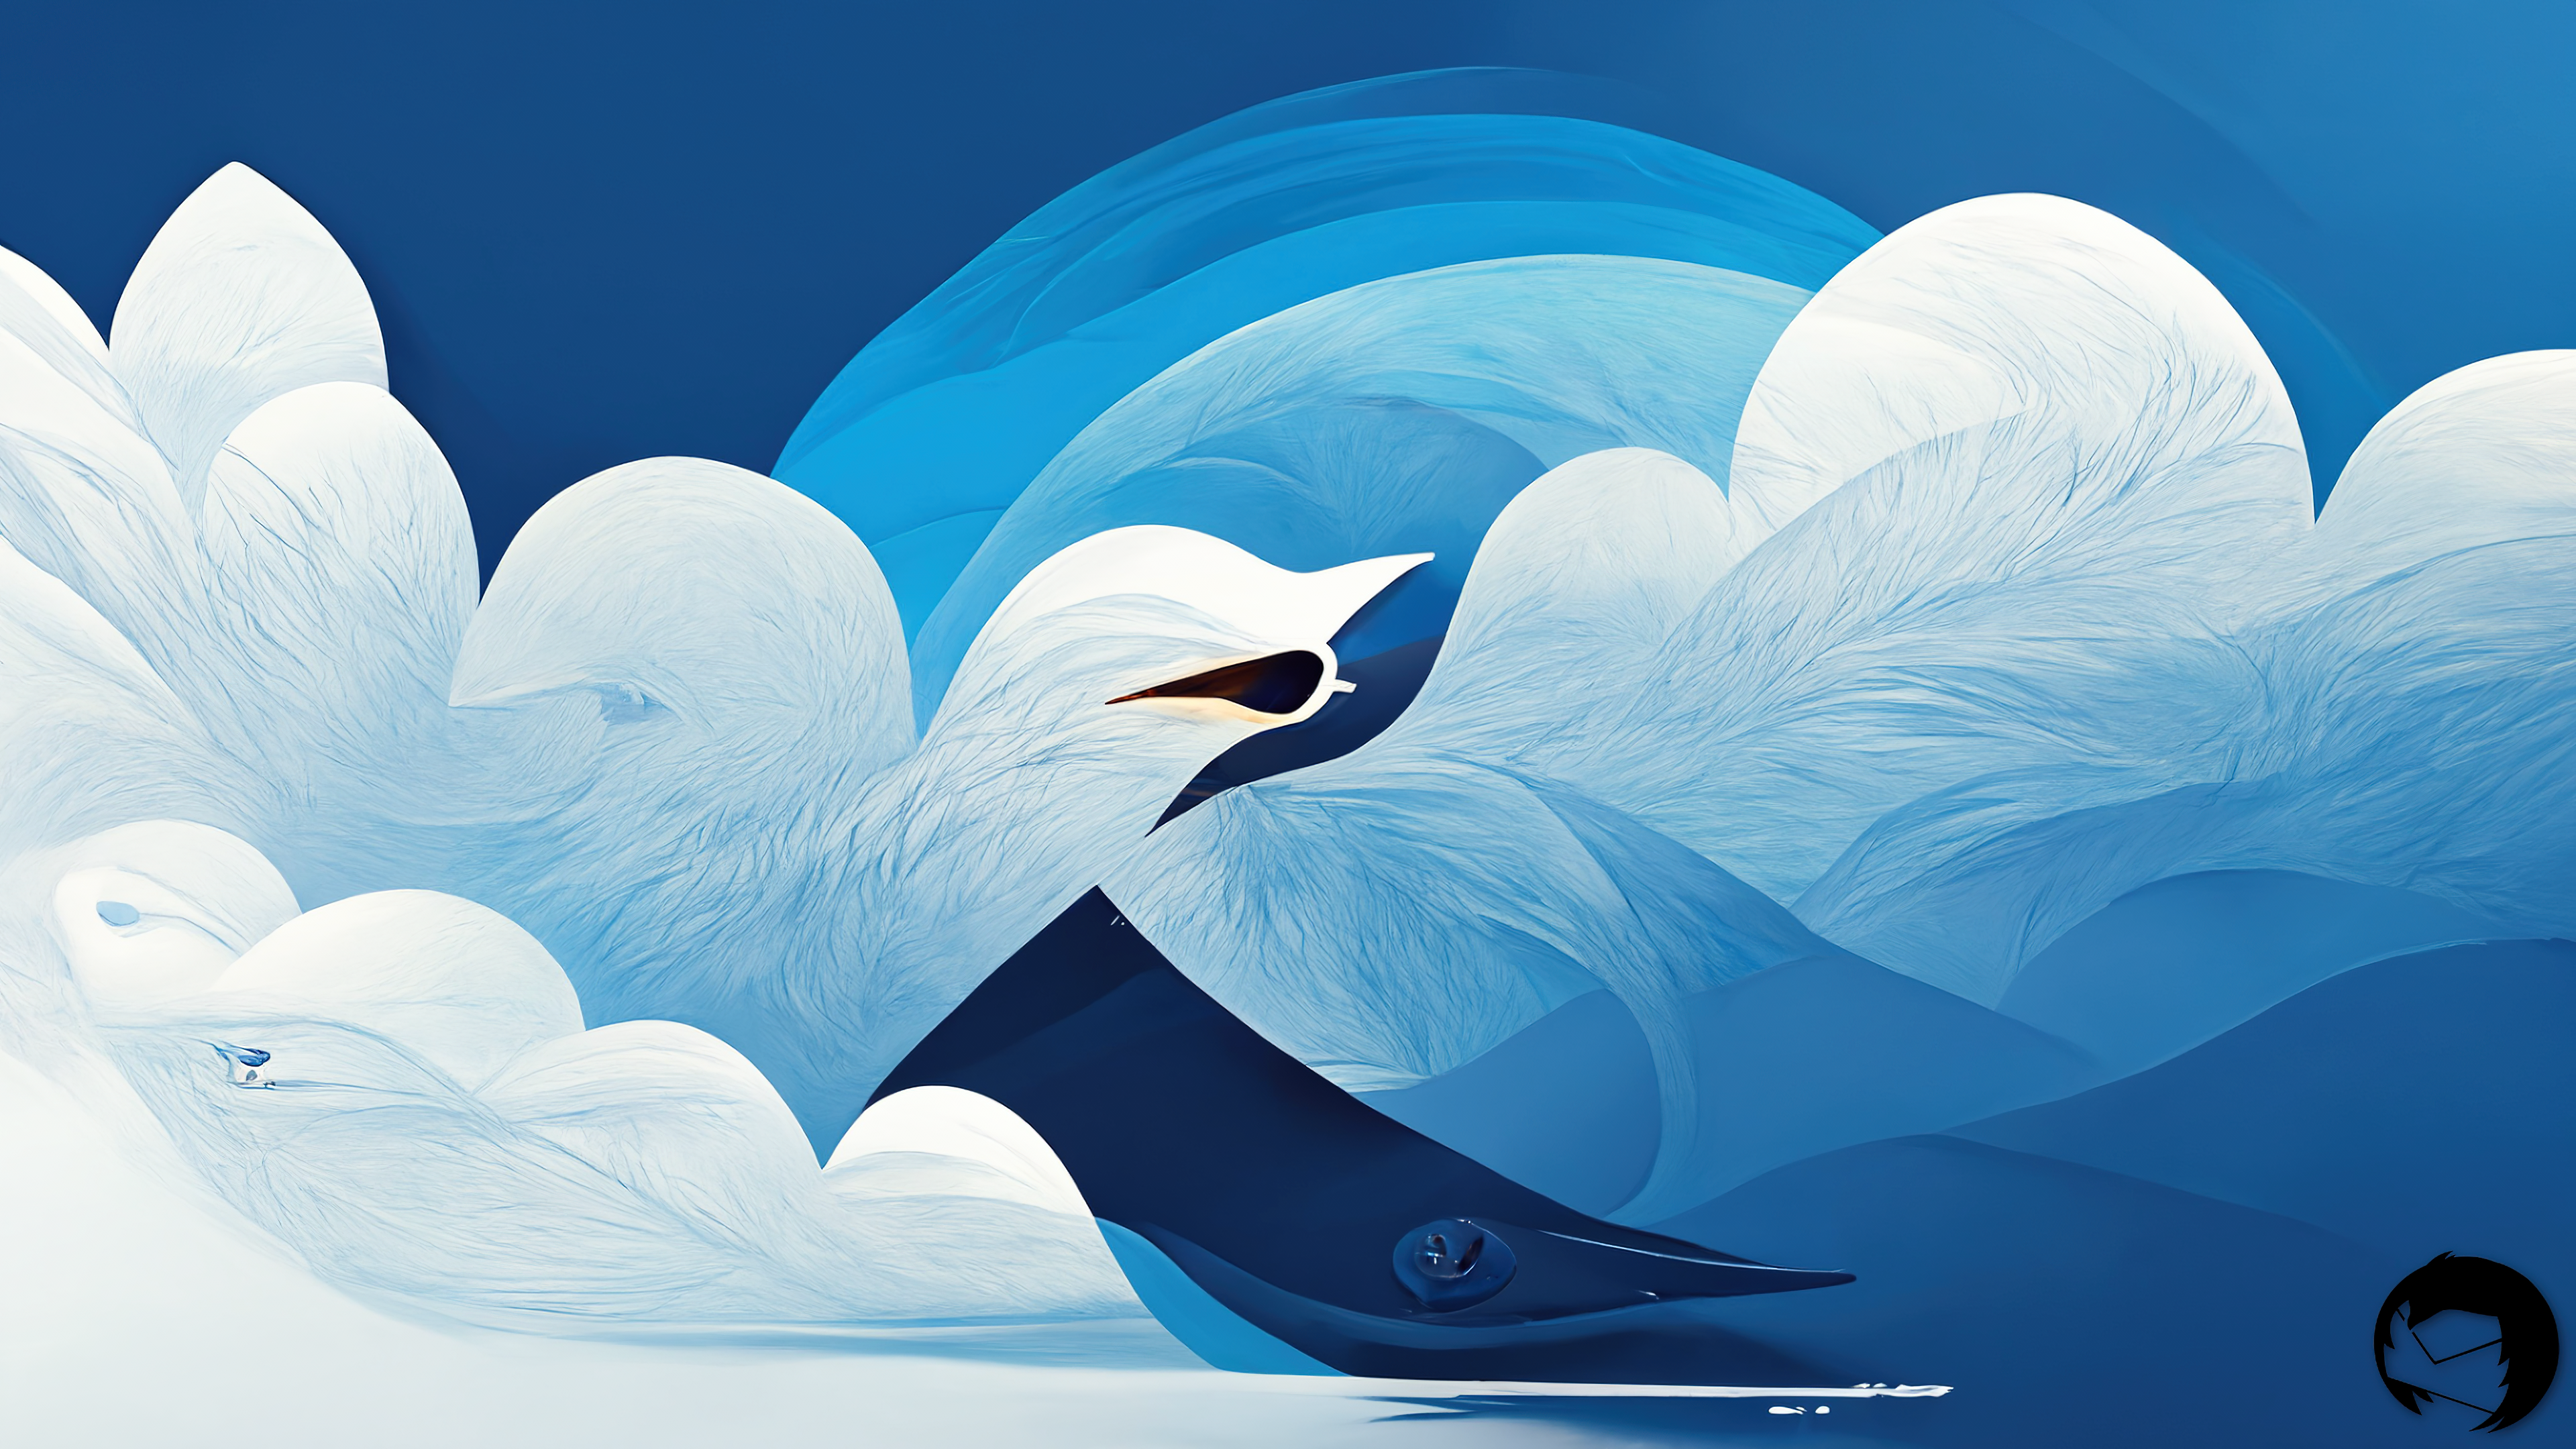 Thunderbird Snowy and Textured Wallpaper Upscaled